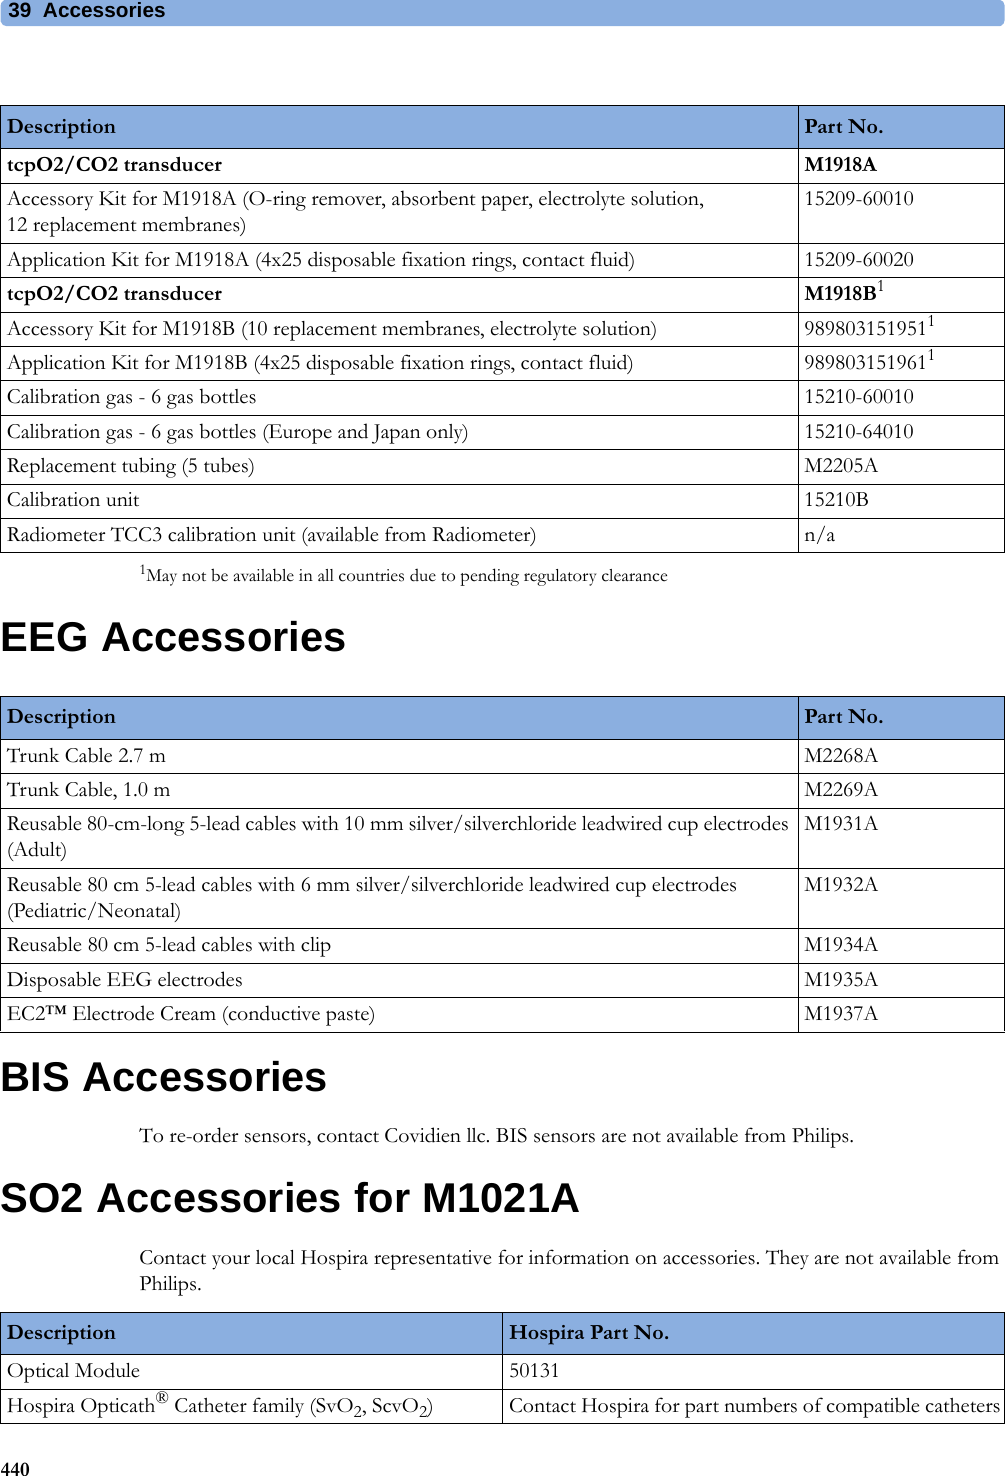 39 Accessories4401May not be available in all countries due to pending regulatory clearanceEEG AccessoriesBIS AccessoriesTo re-order sensors, contact Covidien llc. BIS sensors are not available from Philips.SO2 Accessories for M1021AContact your local Hospira representative for information on accessories. They are not available from Philips.Description Part No.tcpO2/CO2 transducer M1918AAccessory Kit for M1918A (O-ring remover, absorbent paper, electrolyte solution, 12 replacement membranes)15209-60010Application Kit for M1918A (4x25 disposable fixation rings, contact fluid) 15209-60020tcpO2/CO2 transducer M1918B1Accessory Kit for M1918B (10 replacement membranes, electrolyte solution) 9898031519511Application Kit for M1918B (4x25 disposable fixation rings, contact fluid) 9898031519611Calibration gas - 6 gas bottles 15210-60010Calibration gas - 6 gas bottles (Europe and Japan only) 15210-64010Replacement tubing (5 tubes) M2205ACalibration unit 15210BRadiometer TCC3 calibration unit (available from Radiometer) n/aDescription Part No.Trunk Cable 2.7 m M2268ATrunk Cable, 1.0 m M2269AReusable 80-cm-long 5-lead cables with 10 mm silver/silverchloride leadwired cup electrodes (Adult)M1931AReusable 80 cm 5-lead cables with 6 mm silver/silverchloride leadwired cup electrodes (Pediatric/Neonatal)M1932AReusable 80 cm 5-lead cables with clip M1934ADisposable EEG electrodes M1935AEC2™ Electrode Cream (conductive paste) M1937ADescription Hospira Part No.Optical Module 50131Hospira Opticath® Catheter family (SvO2, ScvO2) Contact Hospira for part numbers of compatible catheters